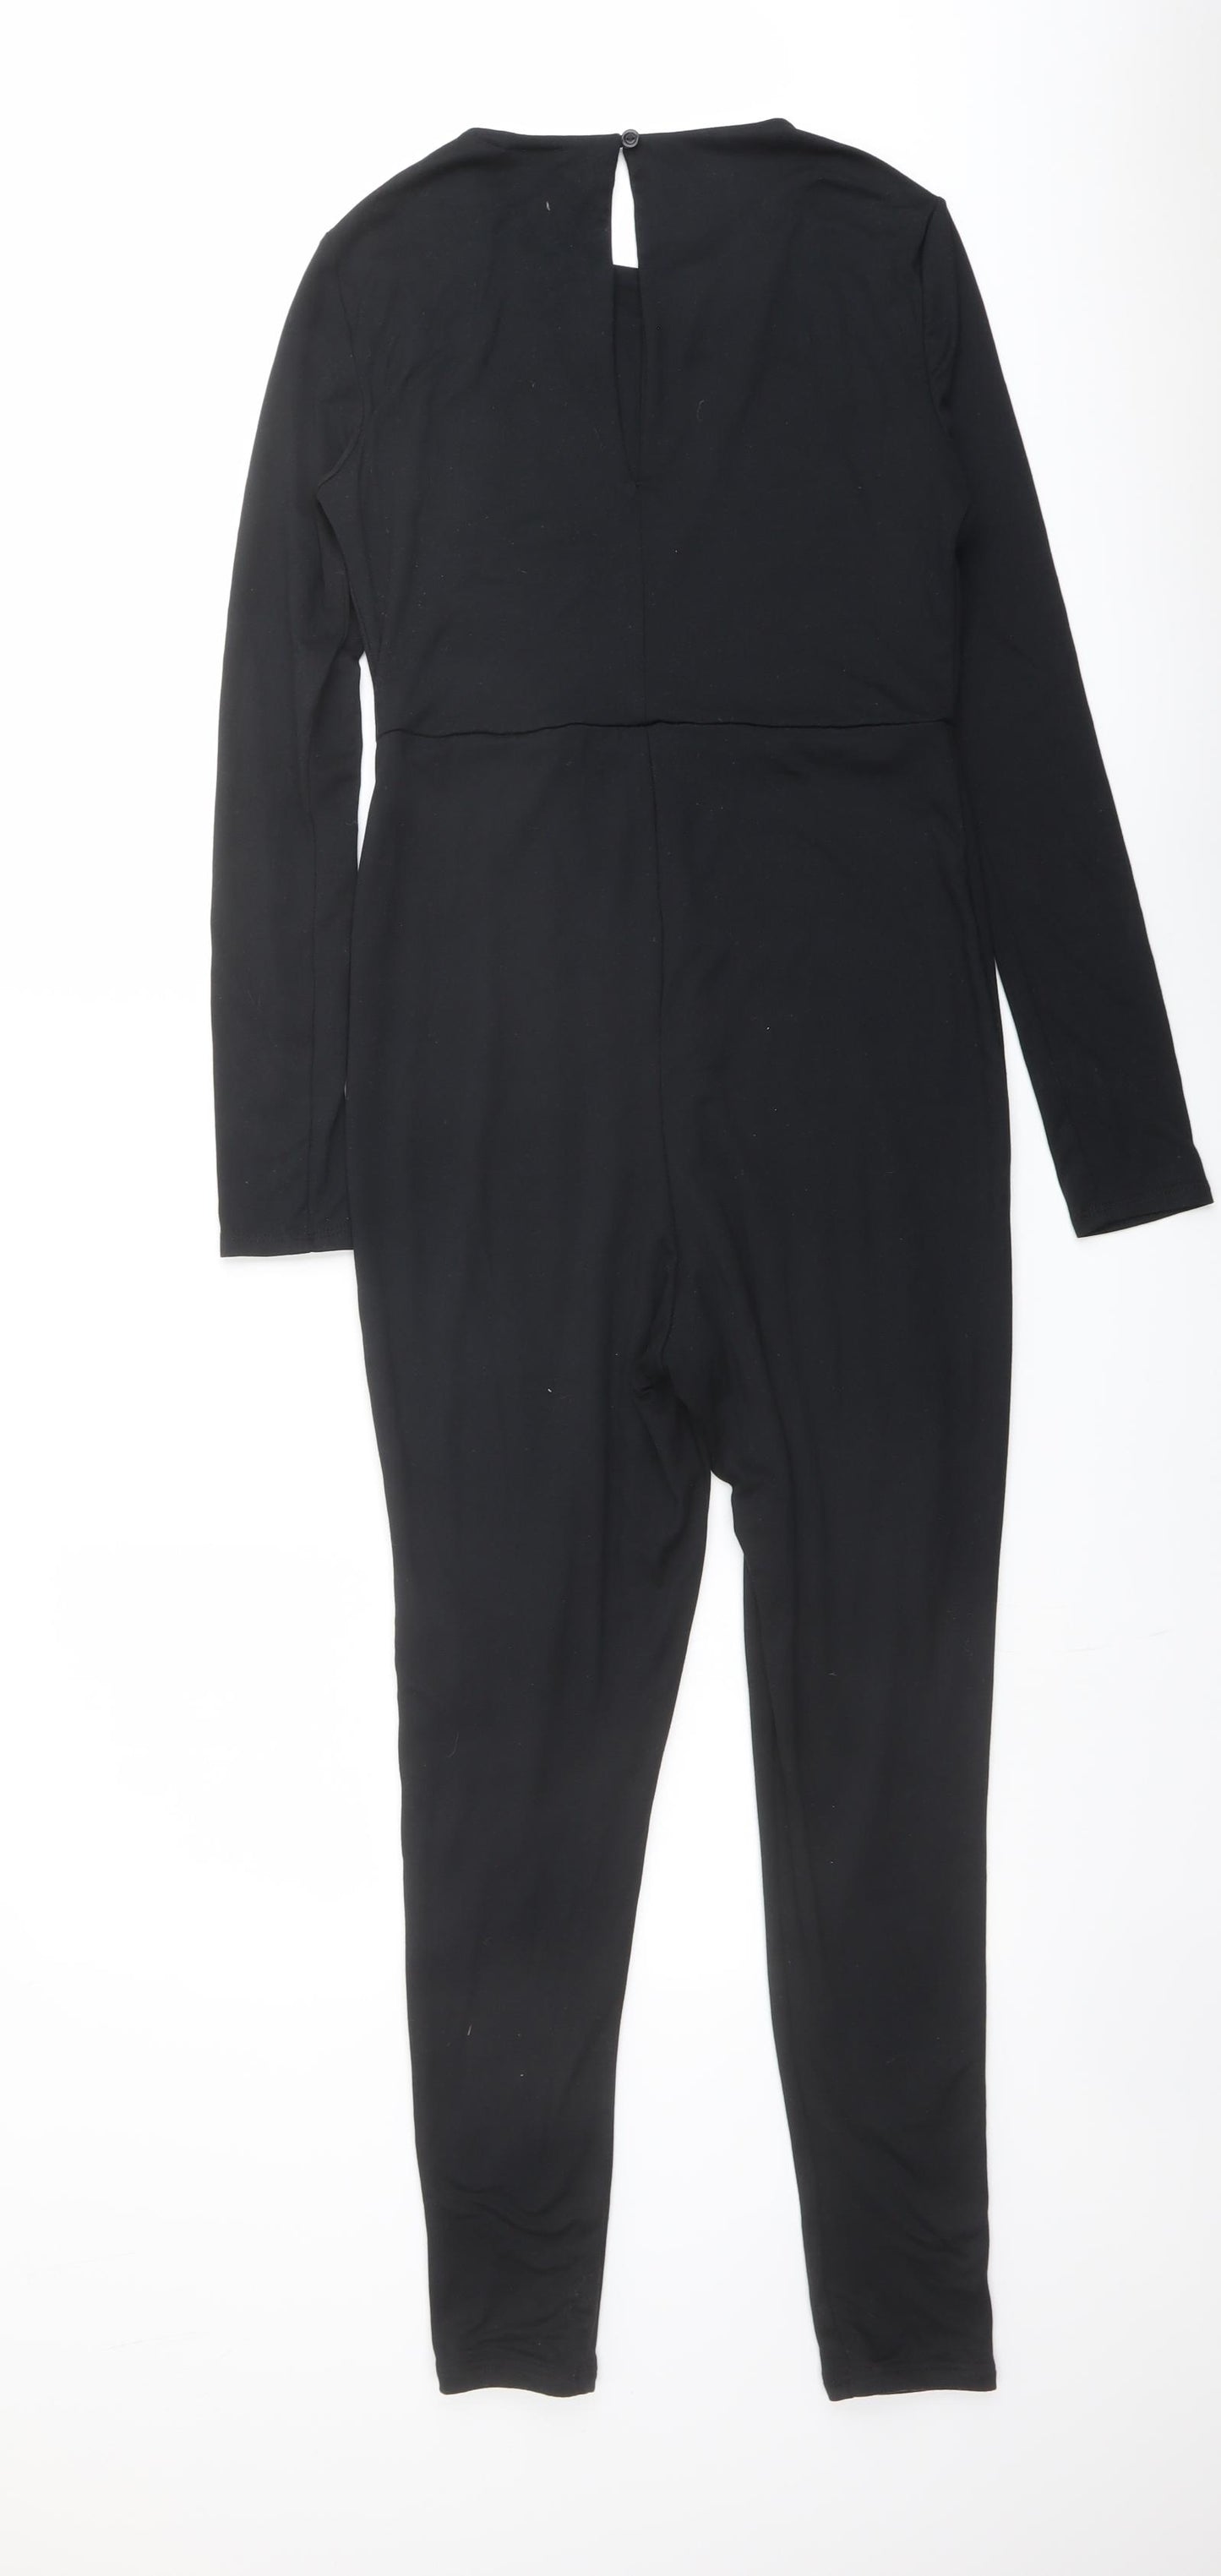 ASOS Womens Black Polyester Jumpsuit One-Piece Size 12 Button